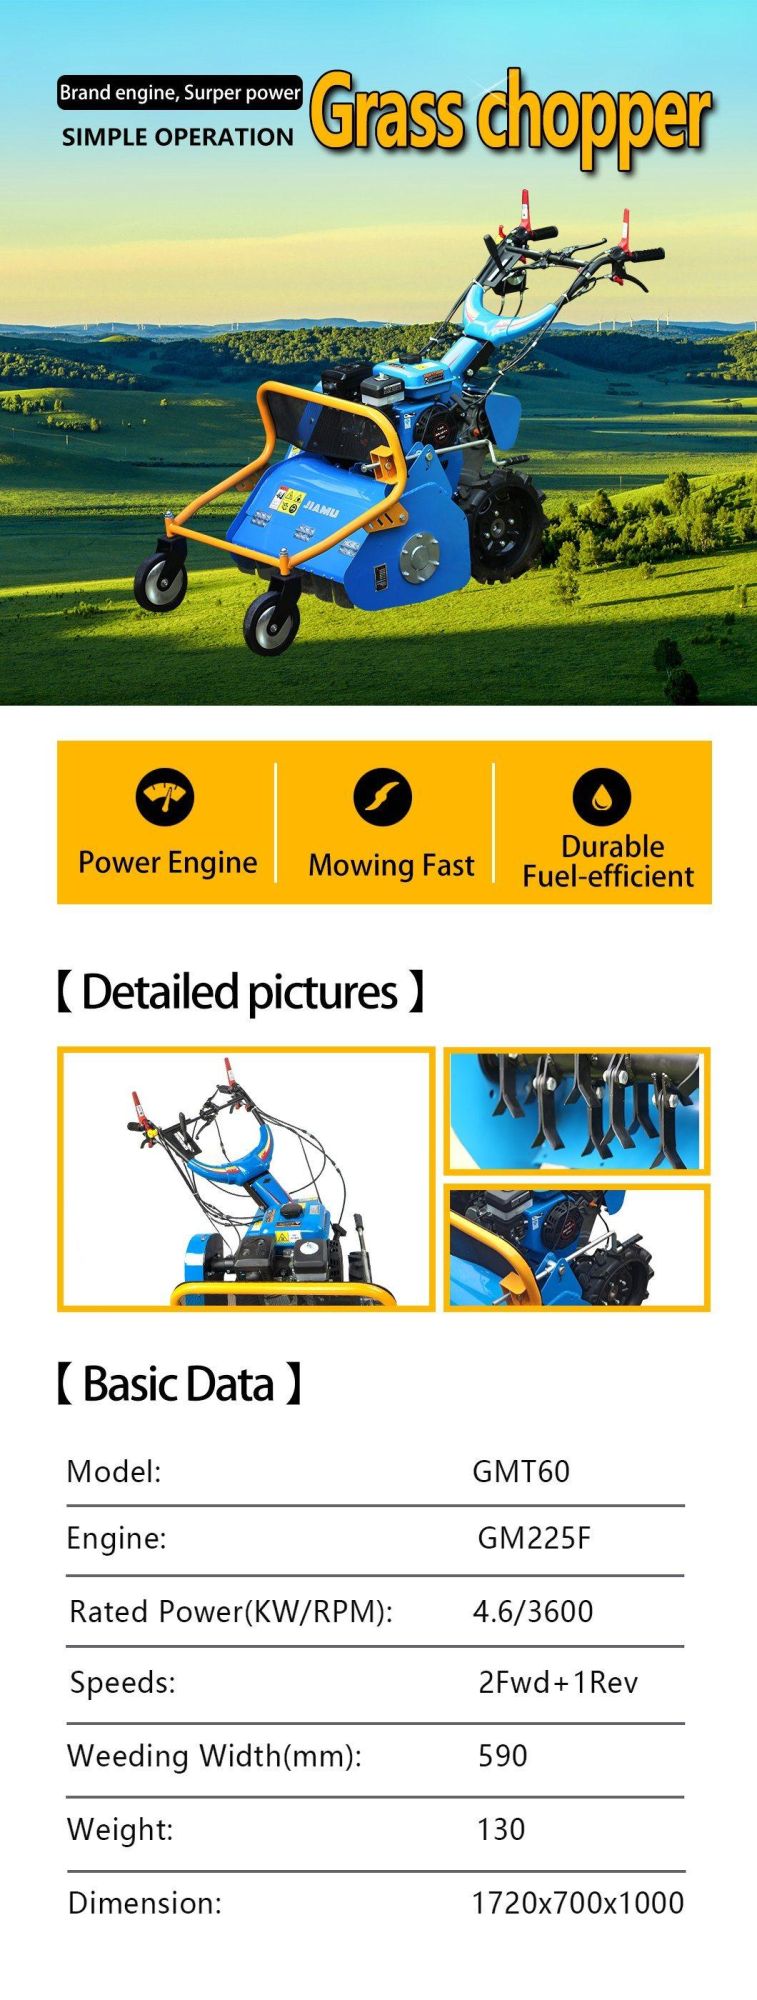 Jiamu 225cc Gasoline Engine Gmt60 Sickle Bar Mower Agricultural Machinery with CE Euro V Hot Sale